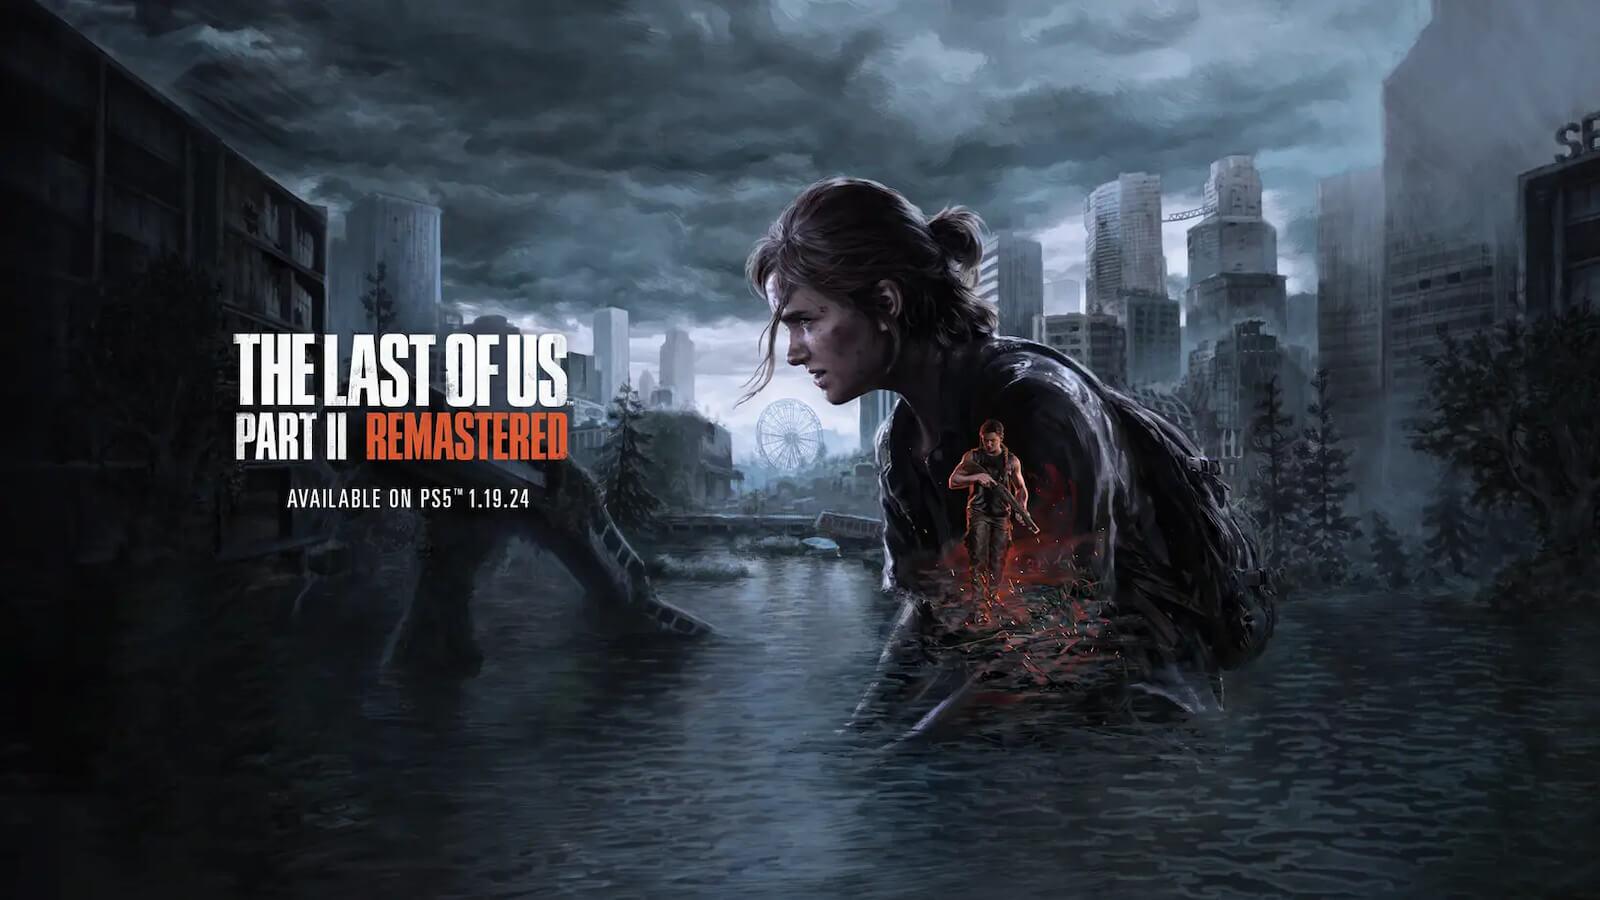 The Last of Us Part II Remastered has gamers reflecting on original's "release date"